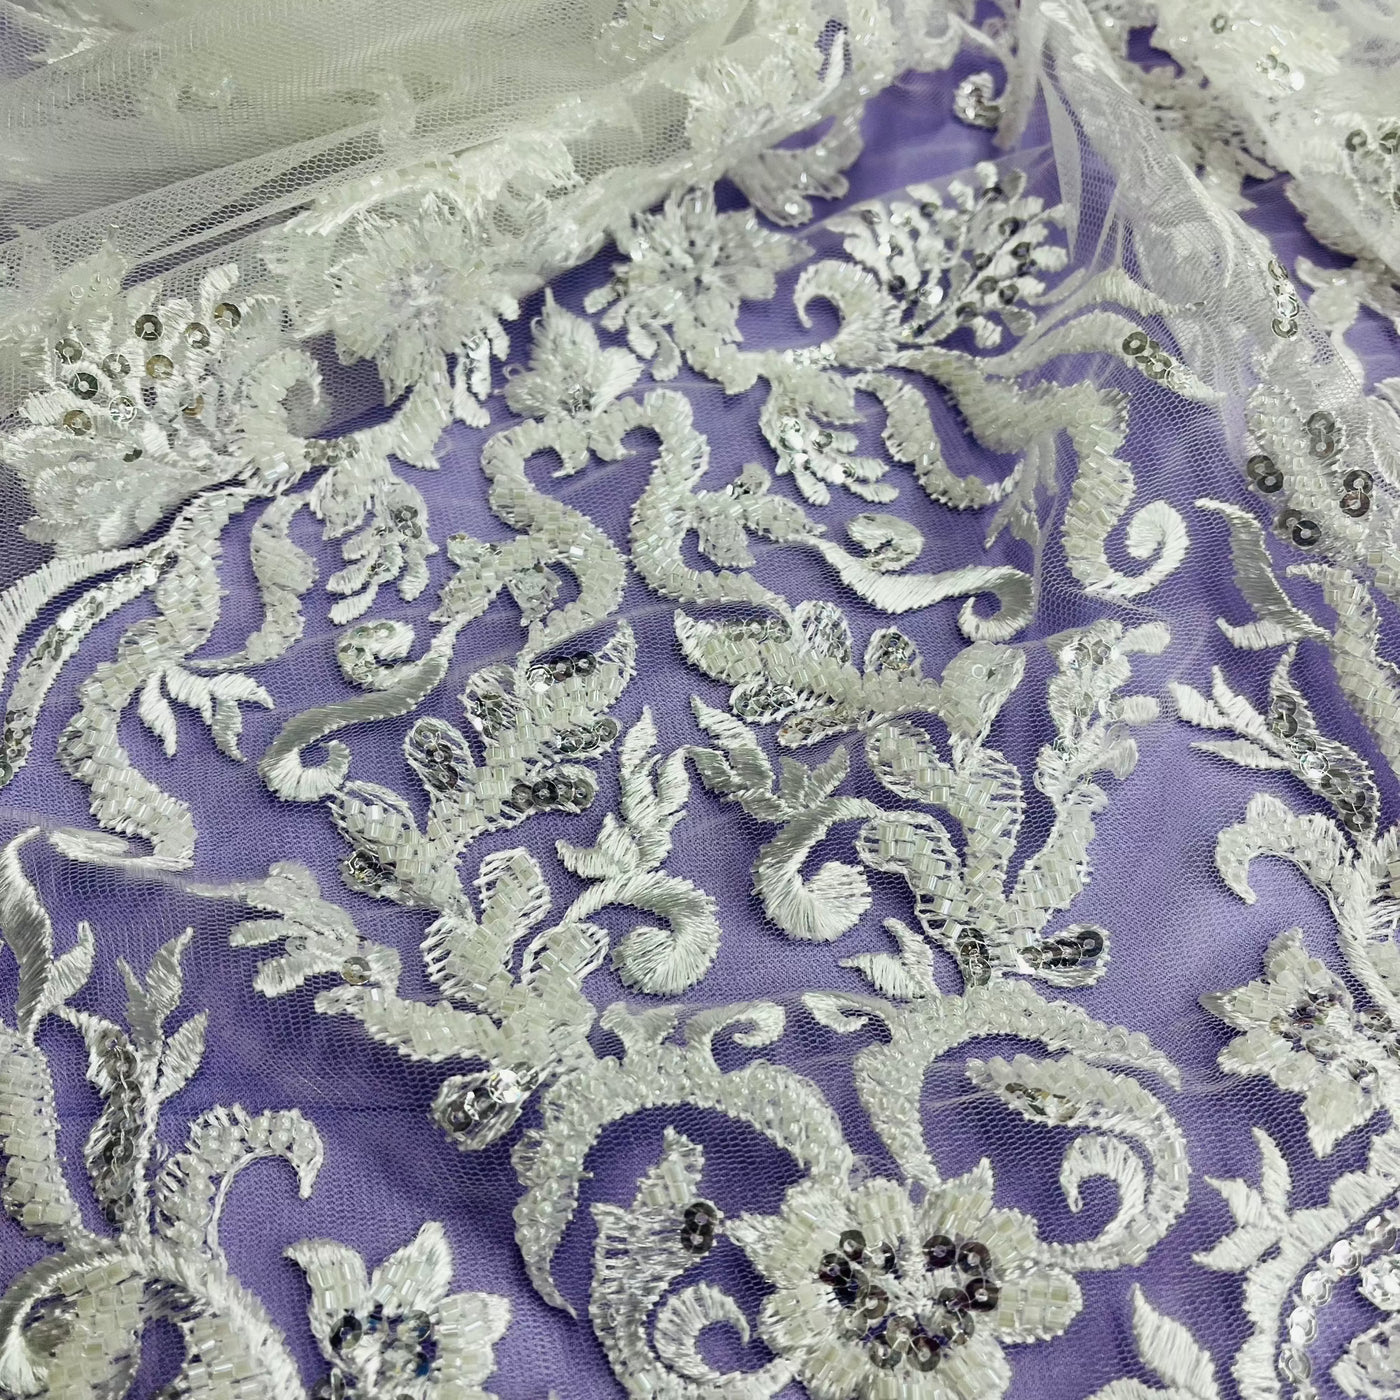 Beaded & Sequined Lace Fabric Embroidered on 100% Polyester Net Mesh | Lace USA - GD-13314 Ivory